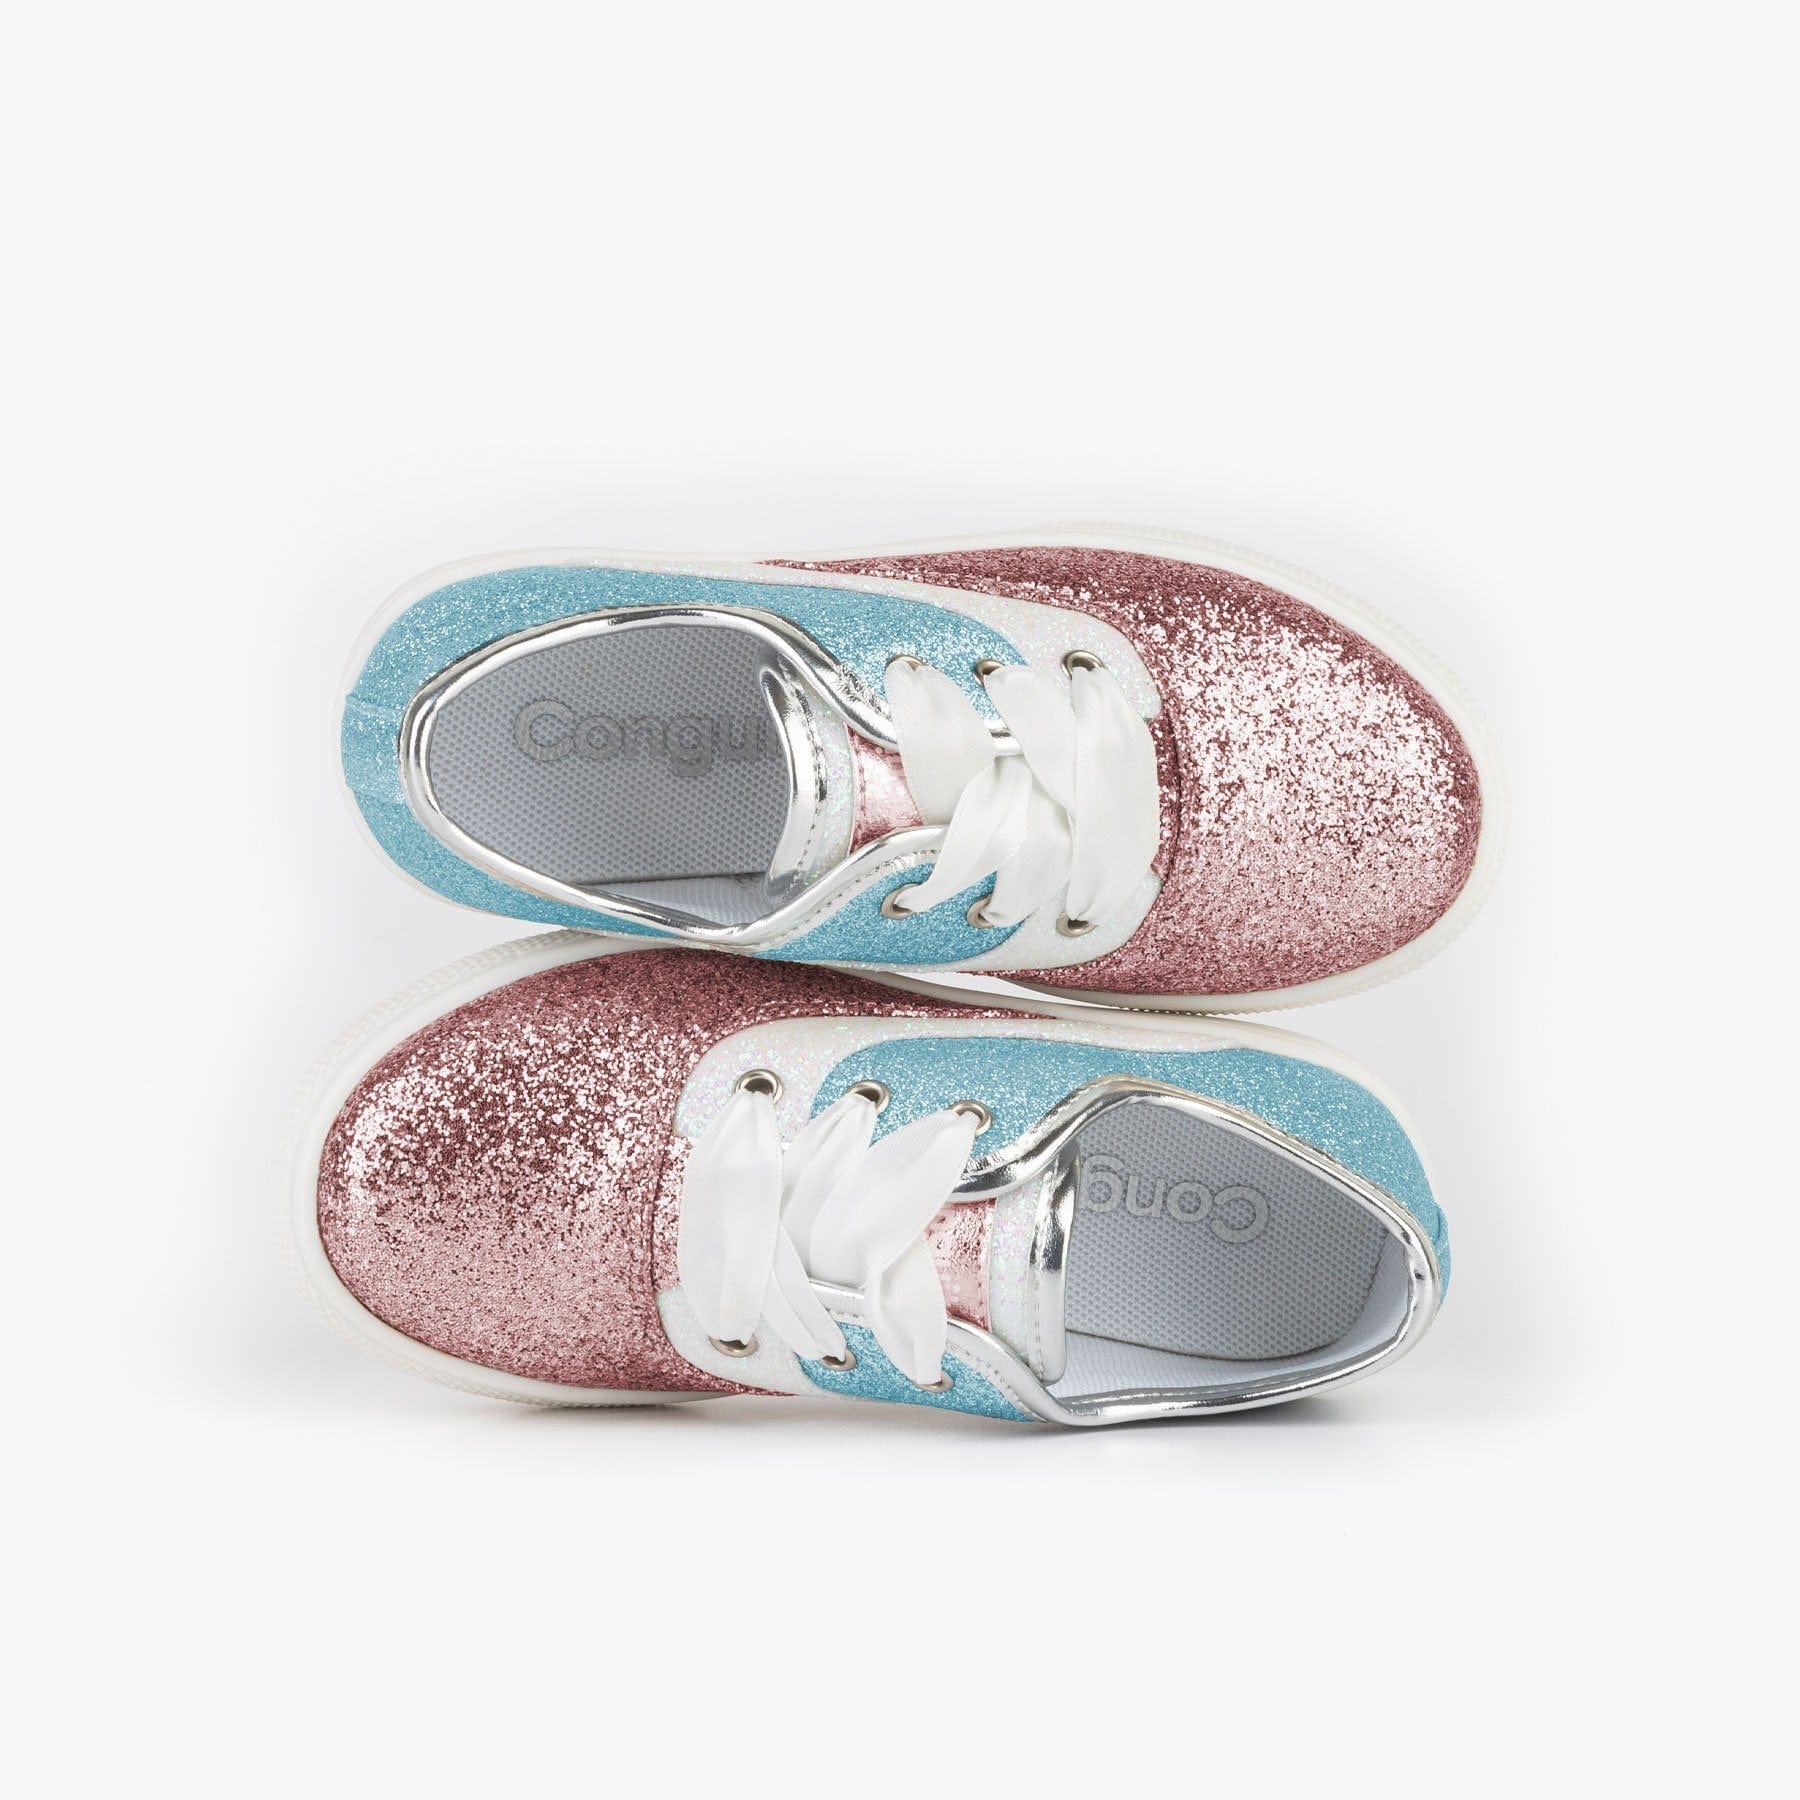 CONGUITOS Shoes Girl's Pink Blue Glitter Sneakers